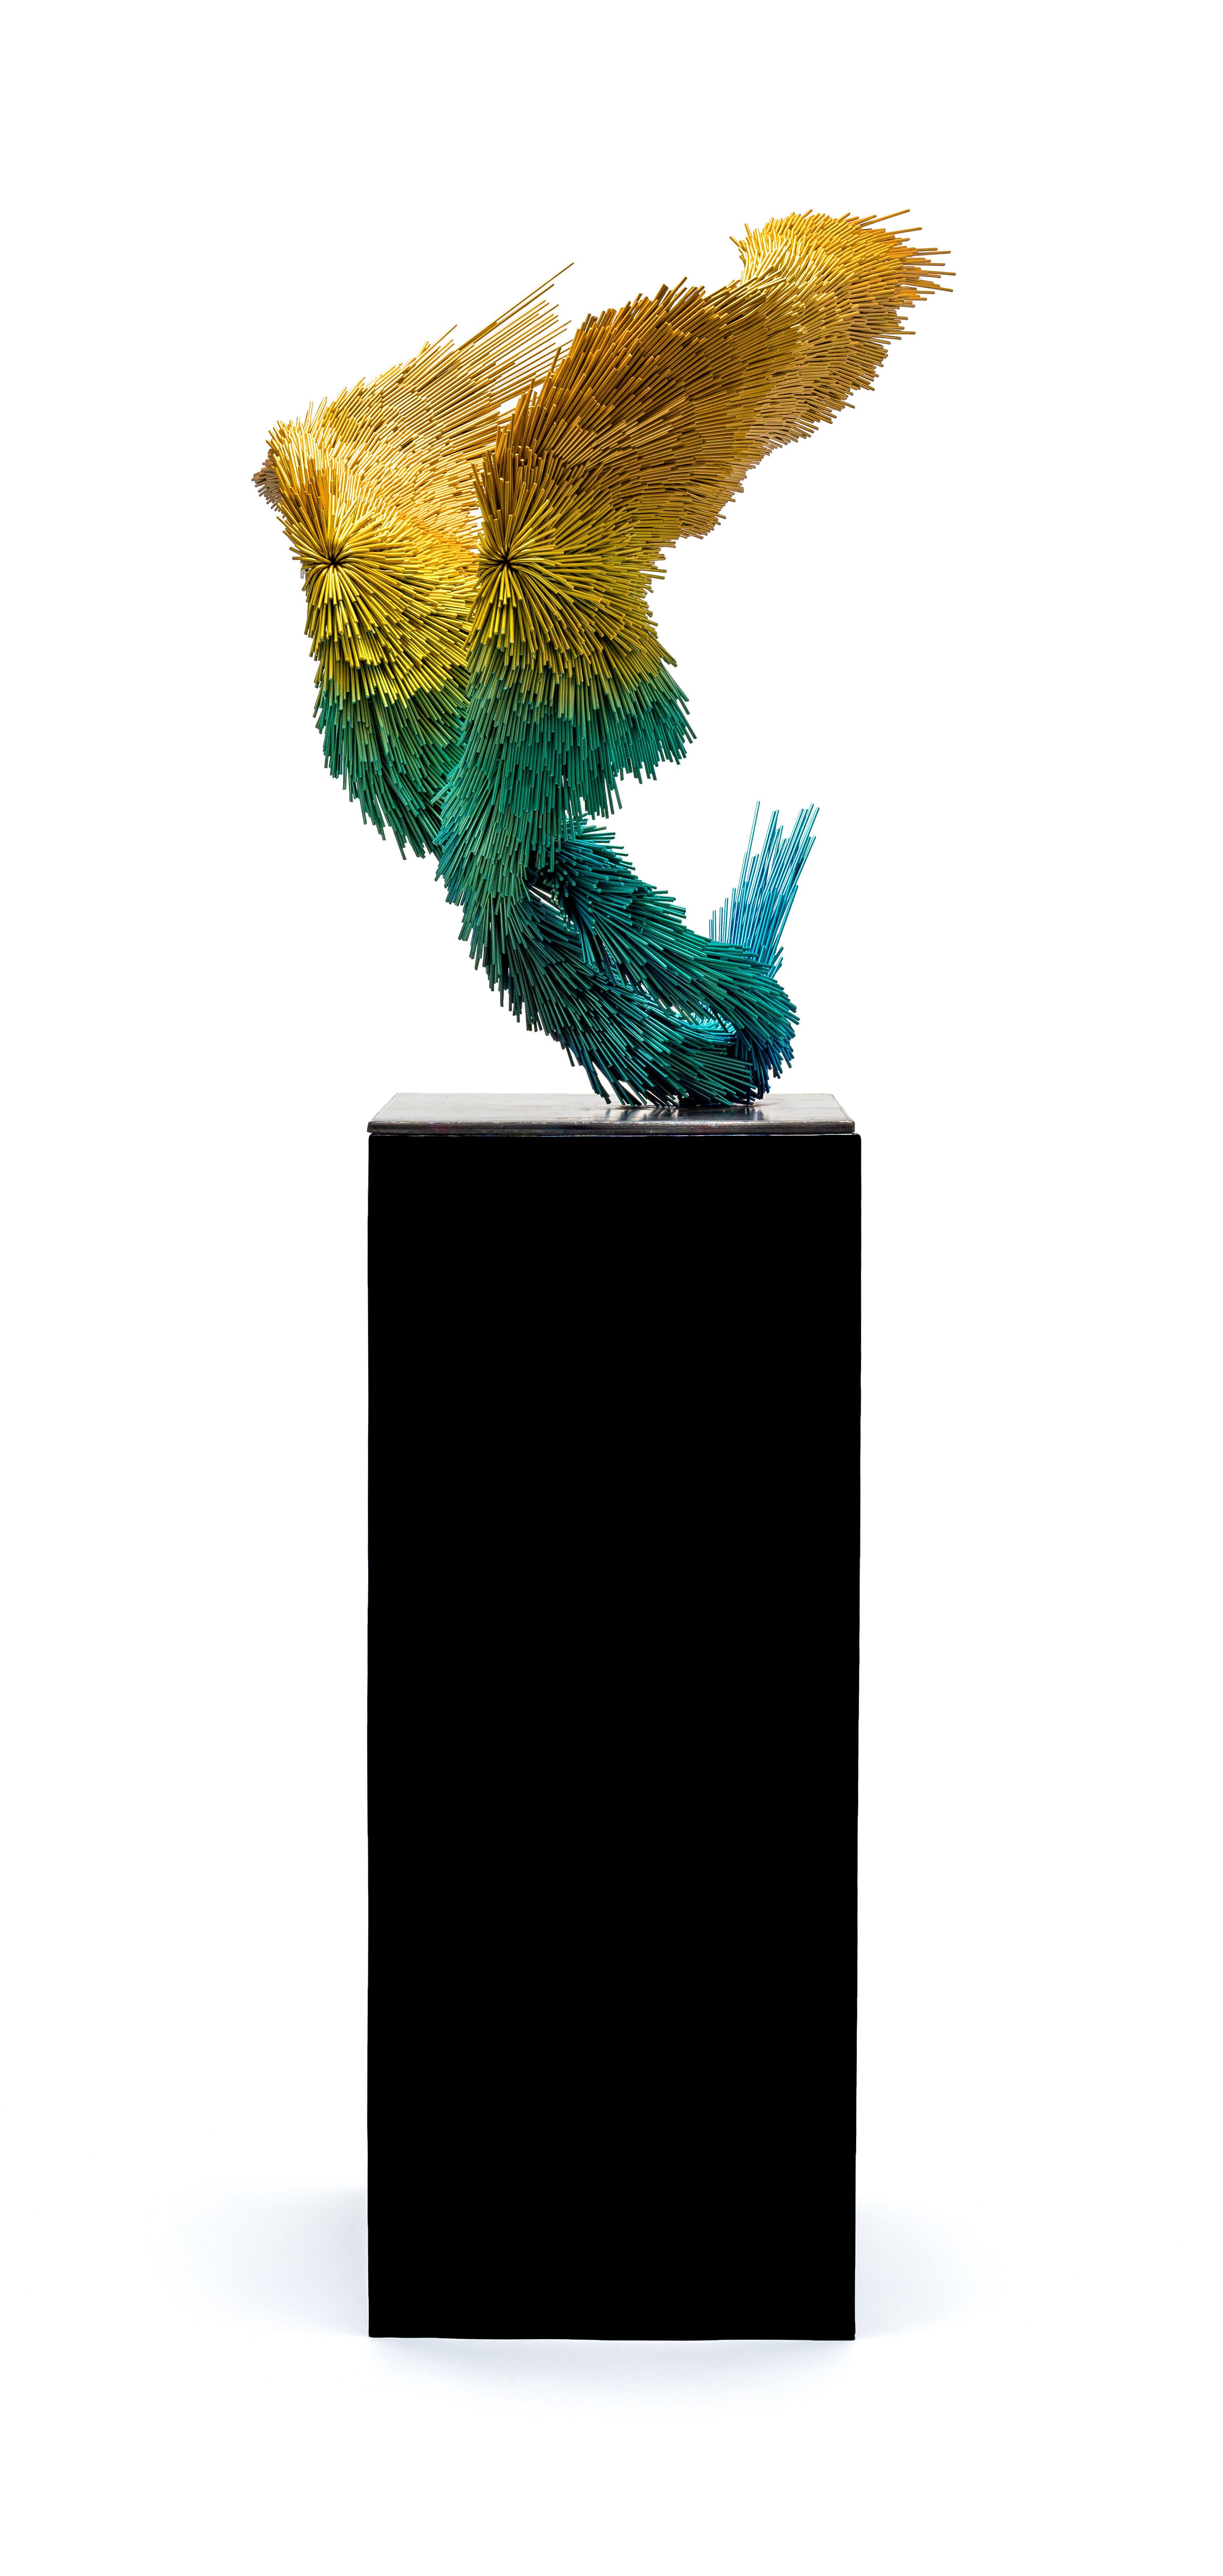 Jake Michael Singer works across different mediums, including sculpture, photography, drawing and painting. His art focuses primarily on materiality, myth, and catharsis. 

Singer calls these sculptures “Murmurations”. The etymology of Murmuration